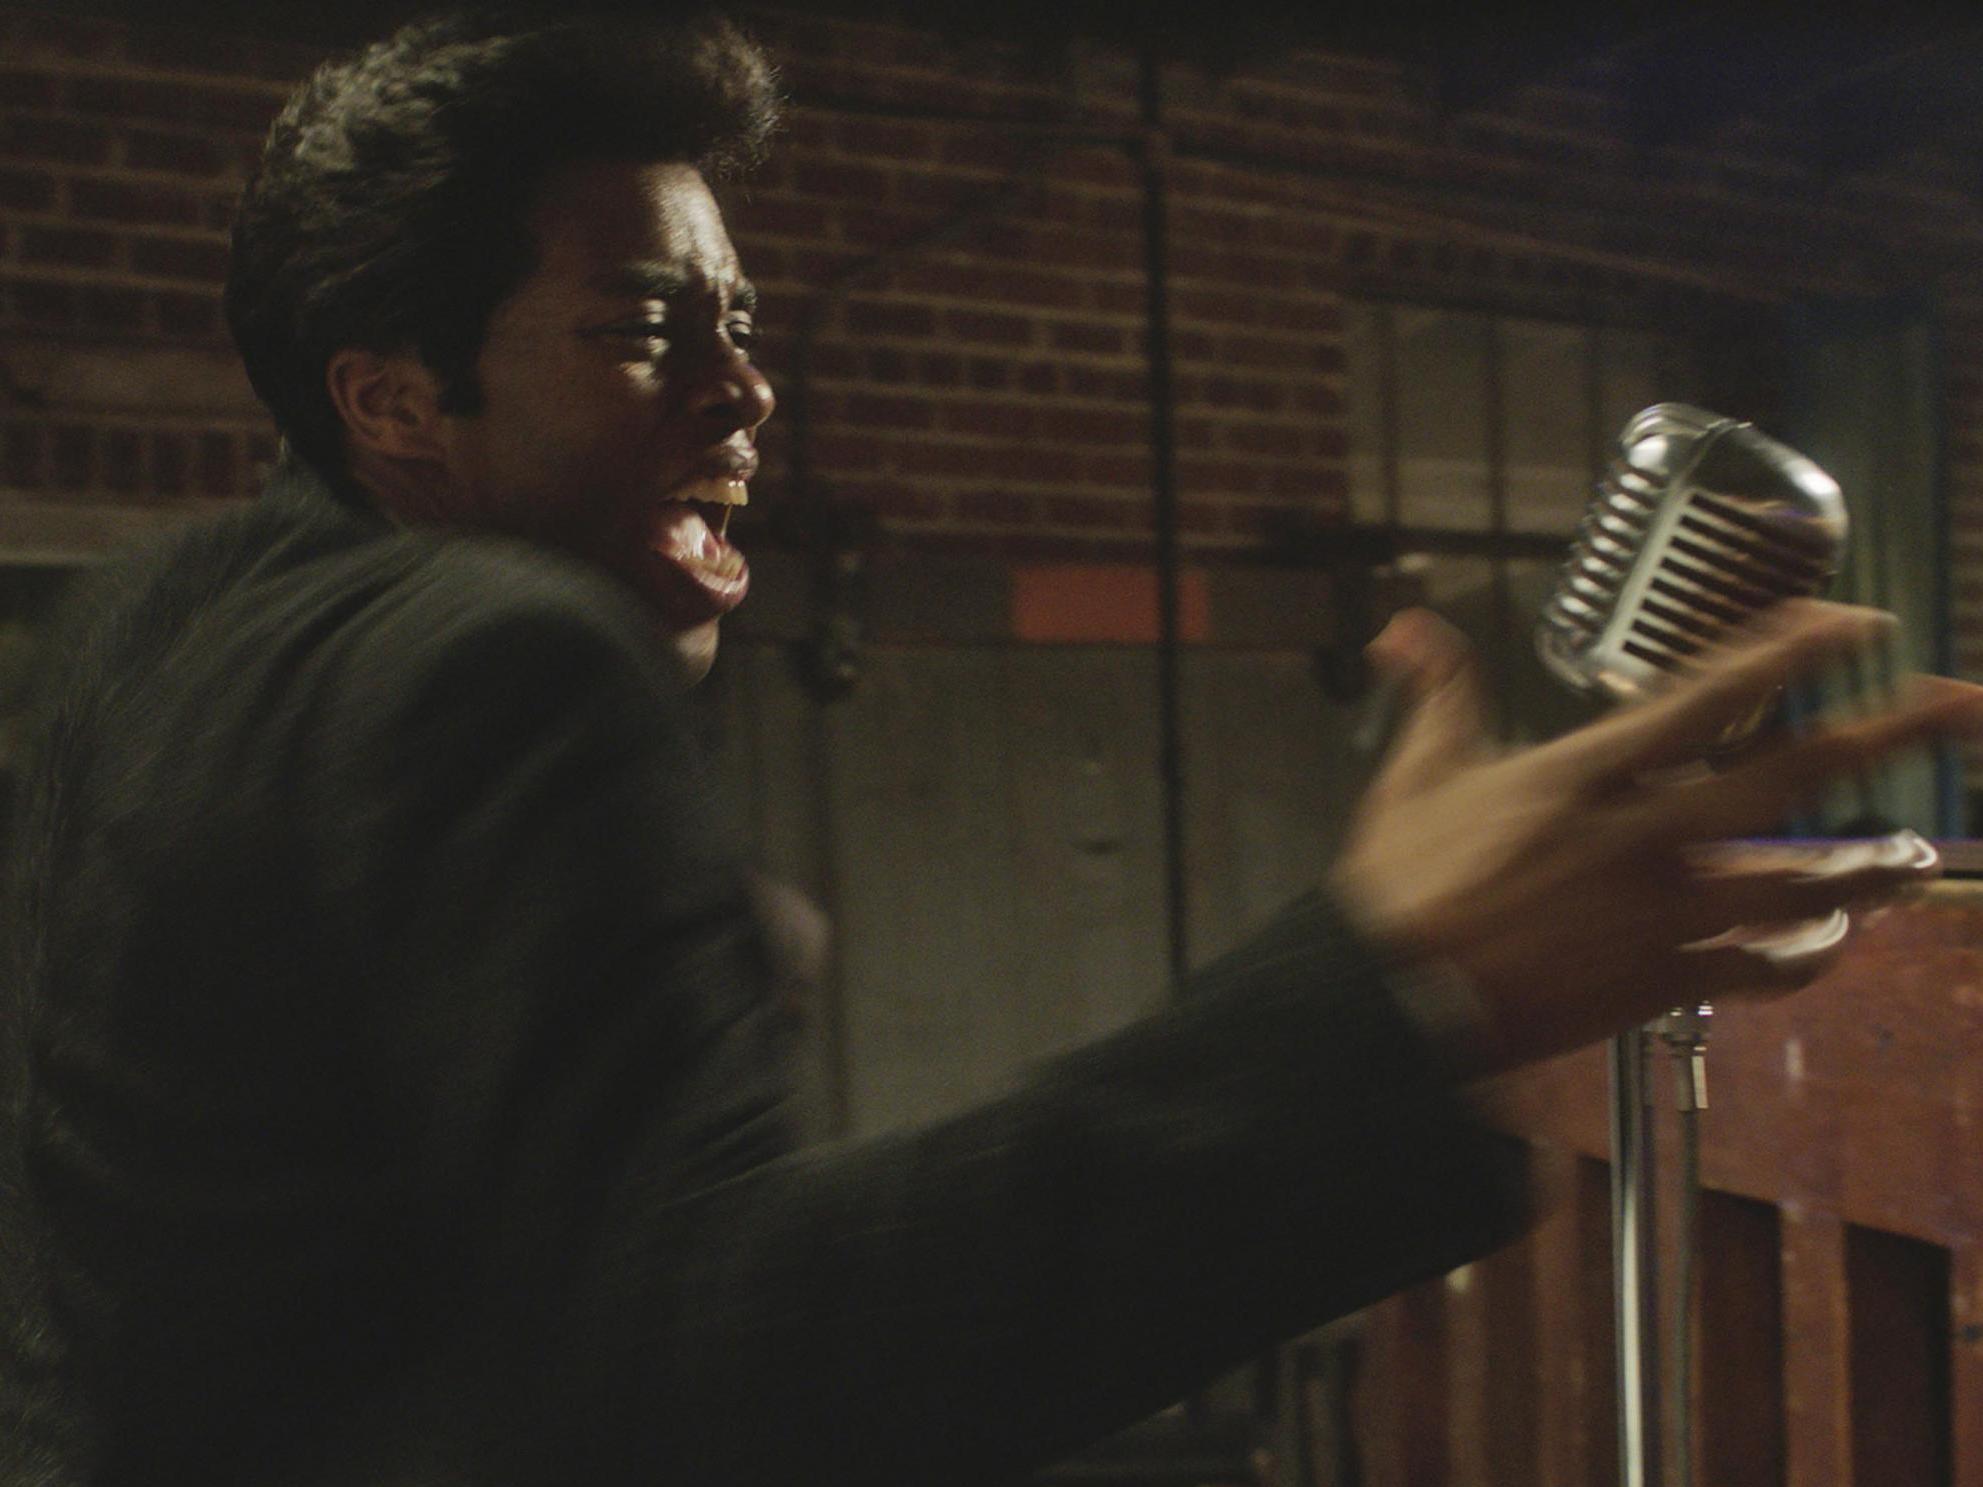 Chadwick Boseman impressed as James Brown in biopic ‘Get On Up’